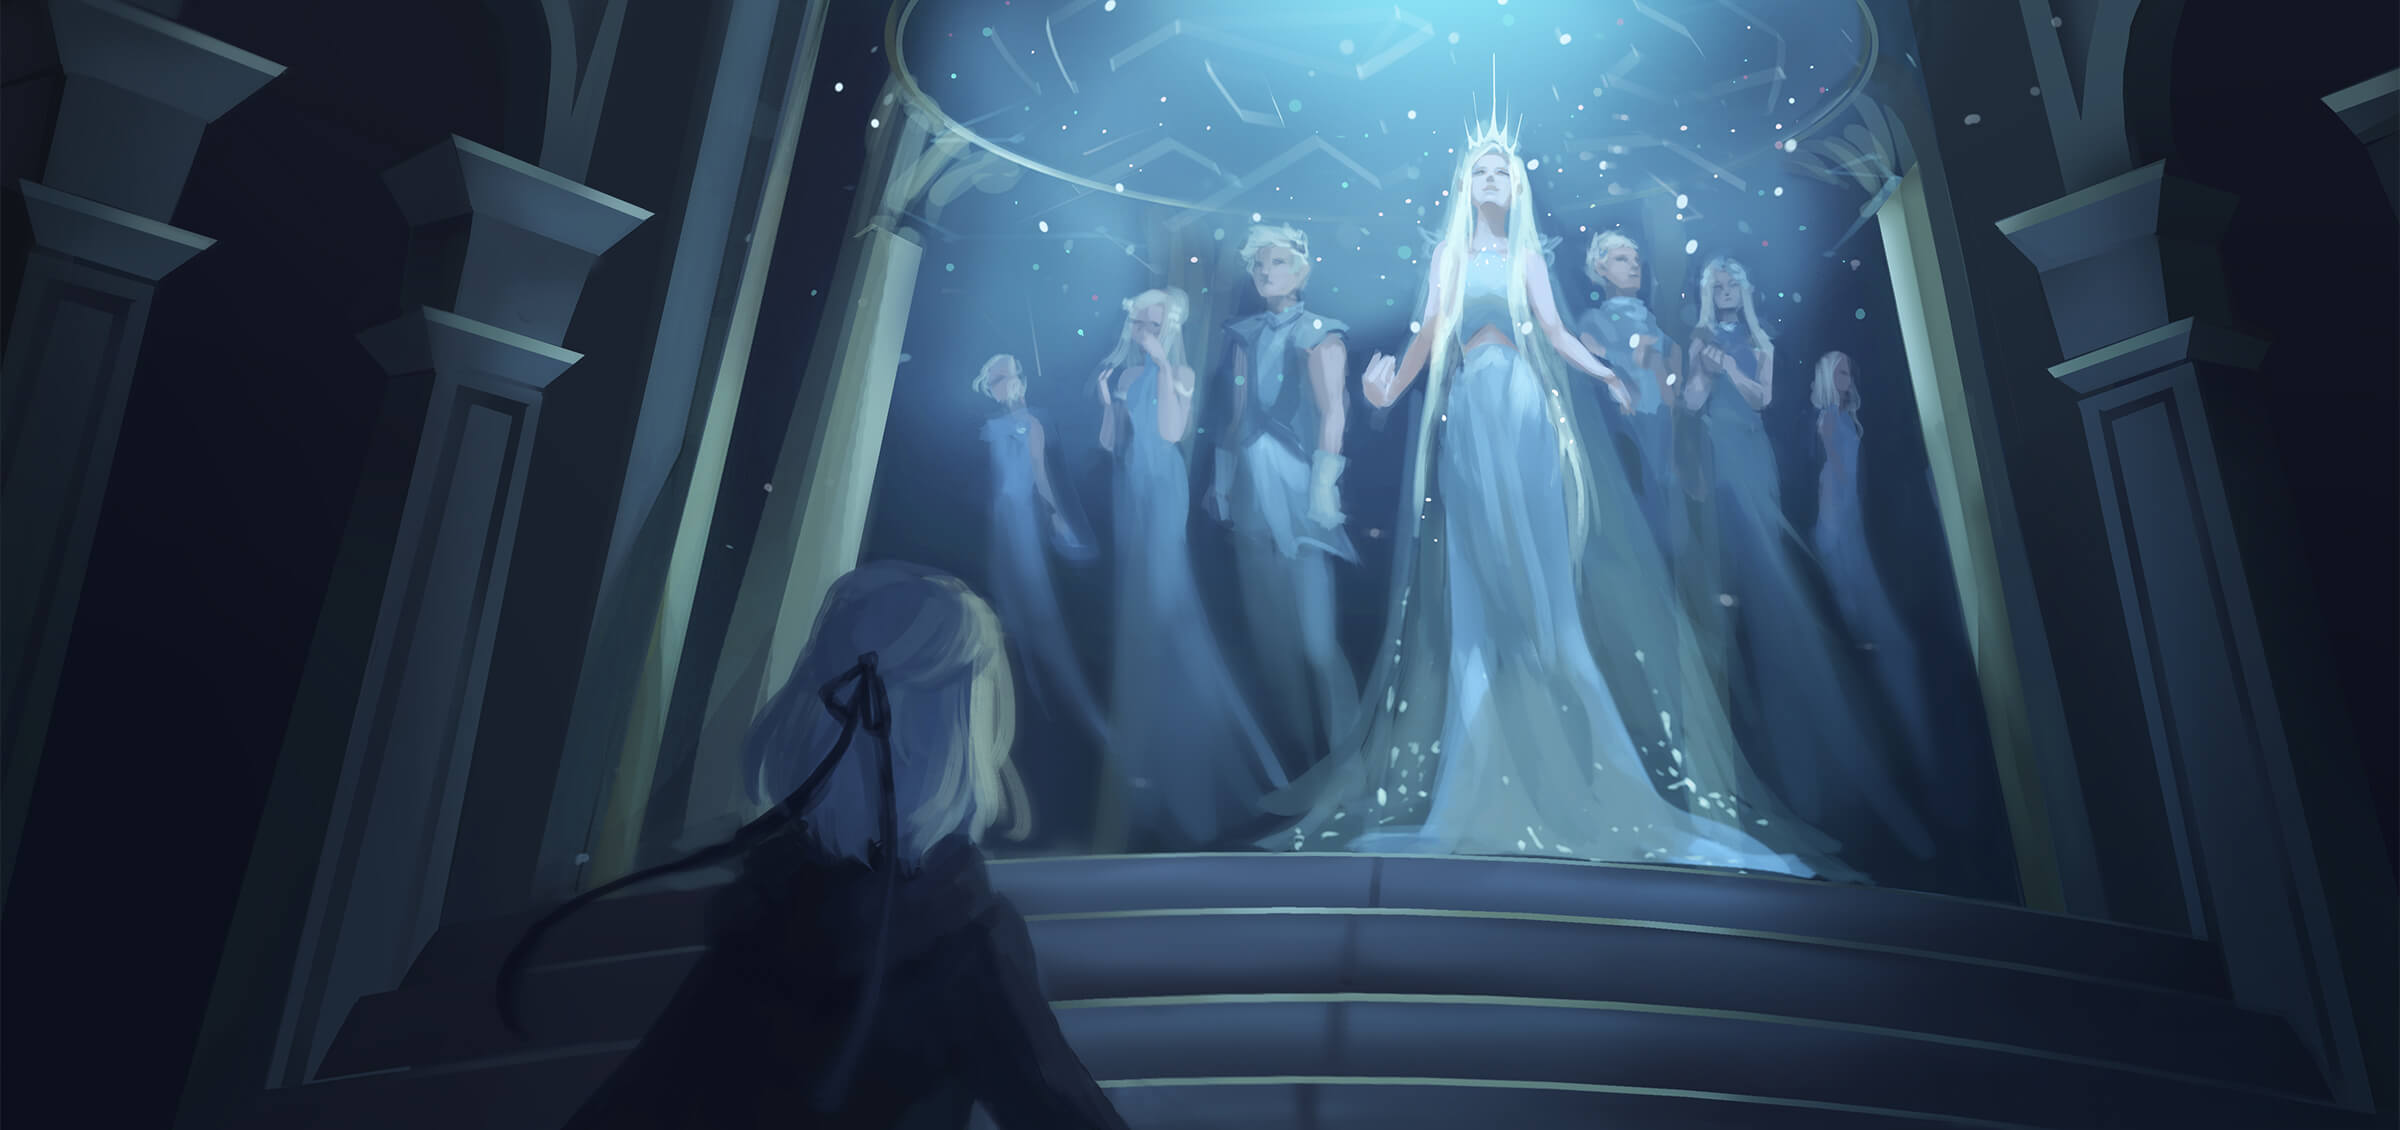 A girl looks up at a queen with long blonde hair and a sparkling gown